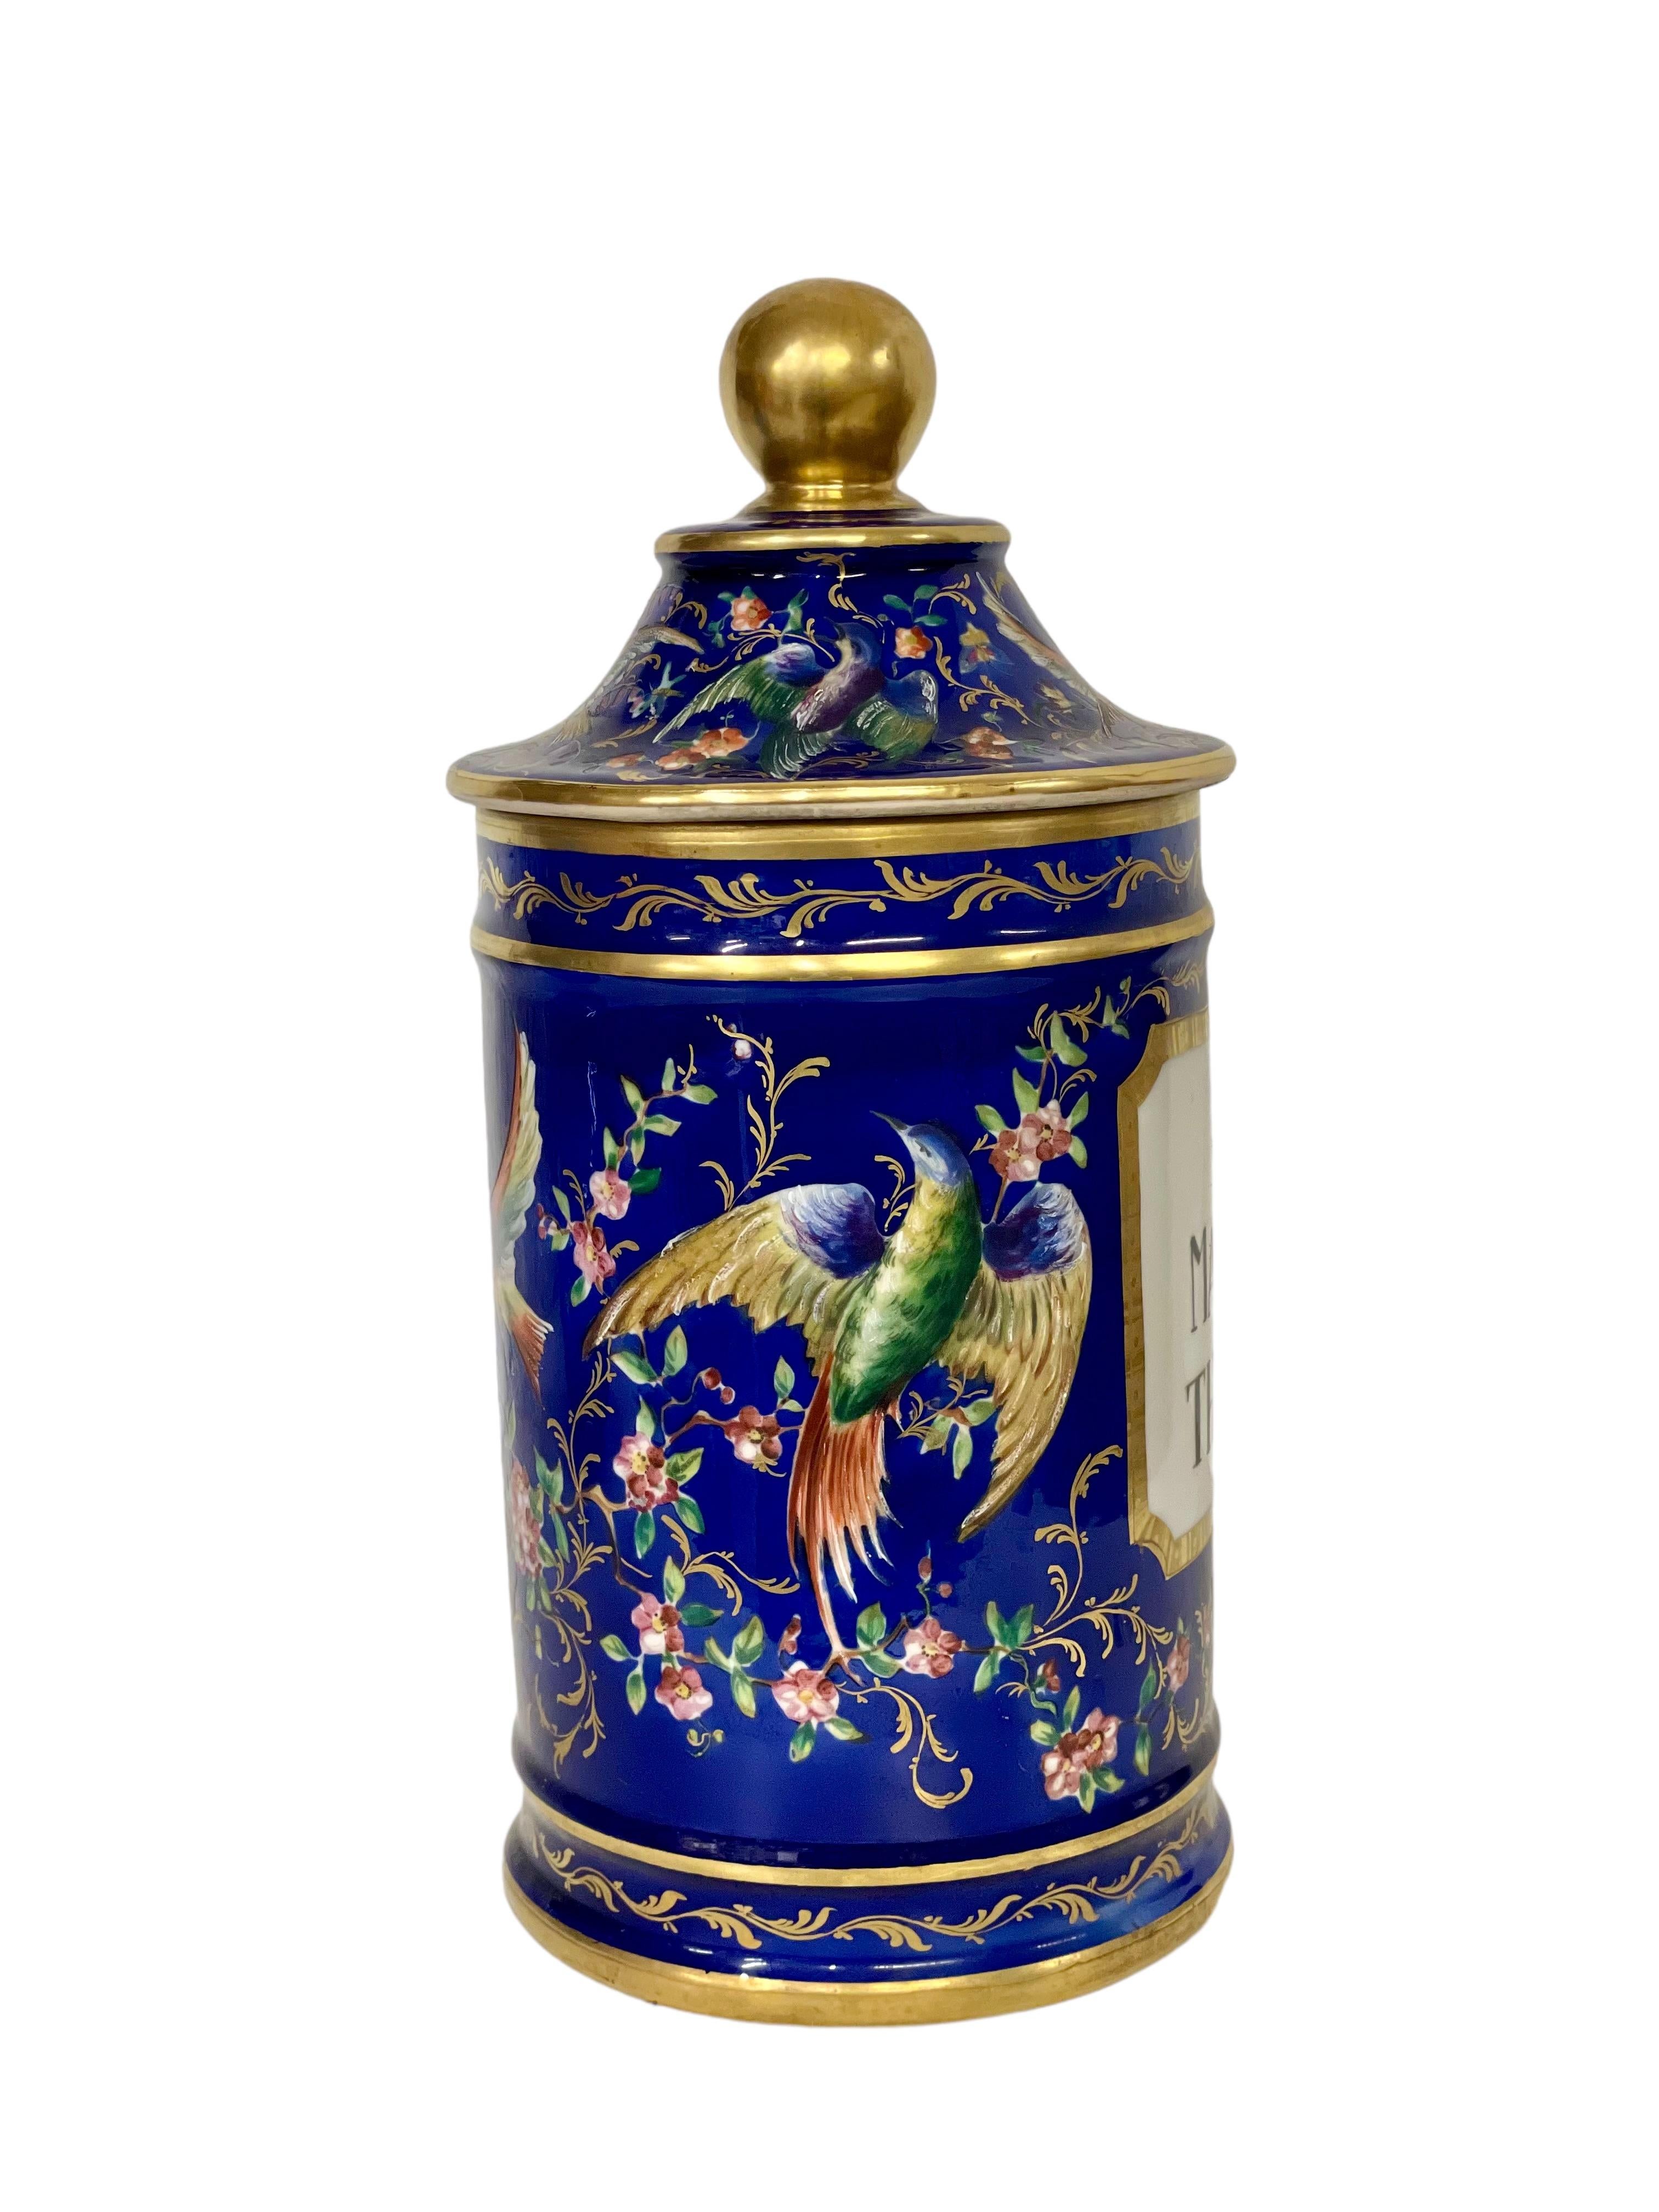 A wonderful Empire period porcelain lidded apothecary jar, dating from the 19th century. Exuberantly decorated with a vibrantly enamelled design of exotic birds and butterflies on a cobalt blue background, it is generously accented with gilt